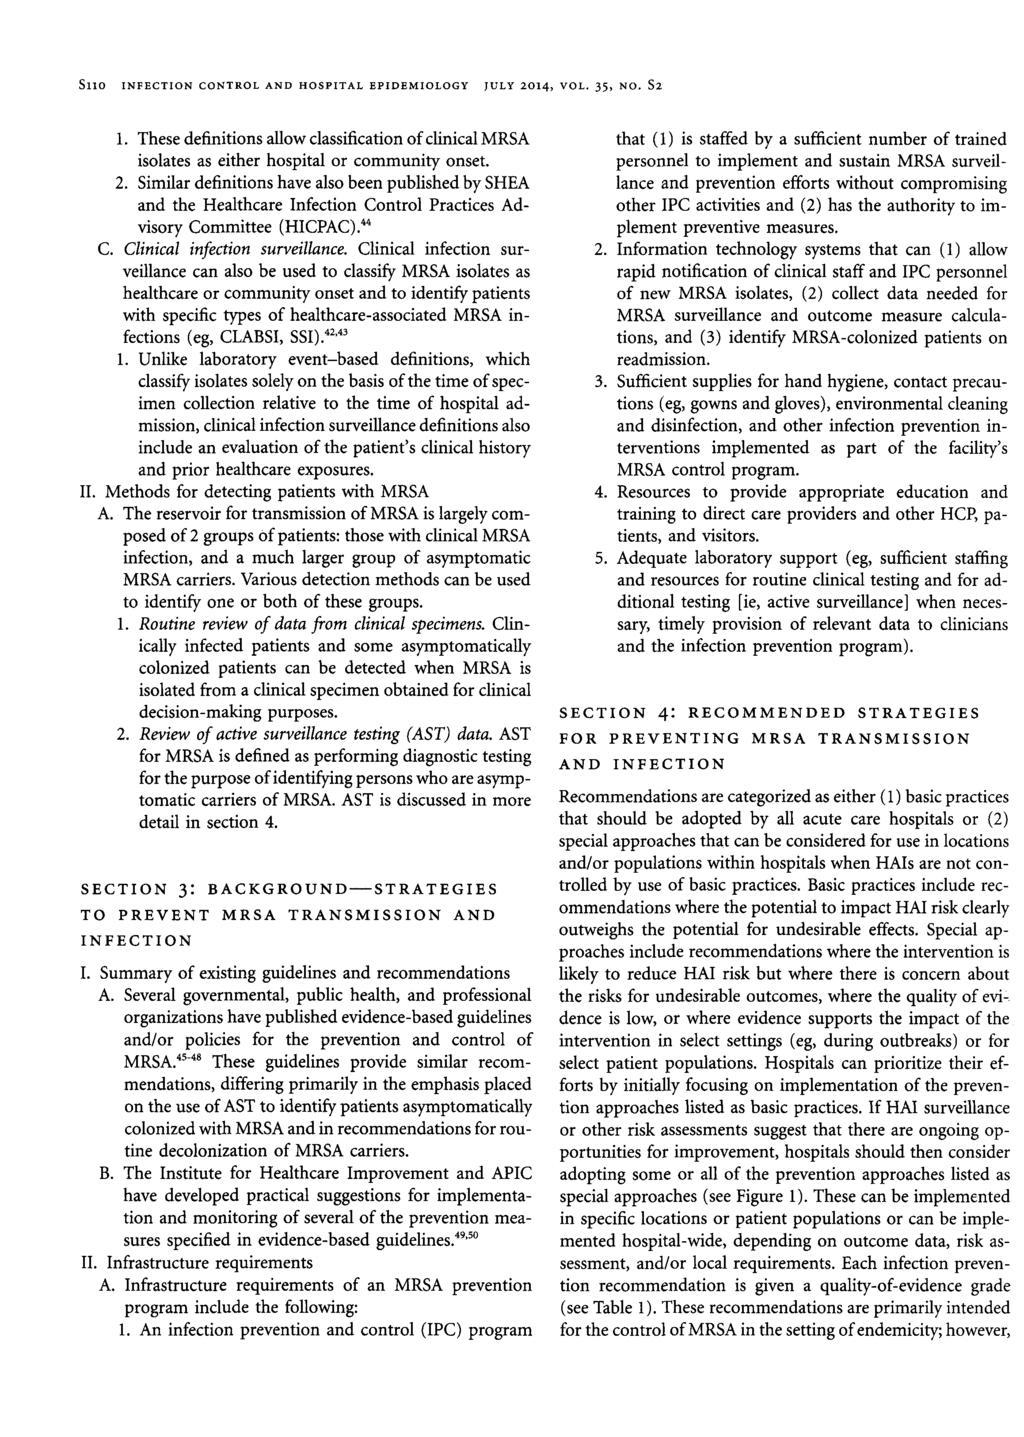 SllO INFECTION CONTROL AND HOSPITAL EPIDEMIOLOGY JULY 2014, VOL. 35, NO. S2 1. These definitions allow classification of clinical MRSA isolates as either hospital or community onset. 2. Similar definitions have also been published by SHEA and the Healthcare Infection Control Practices Advisory Committee (HICPAC).